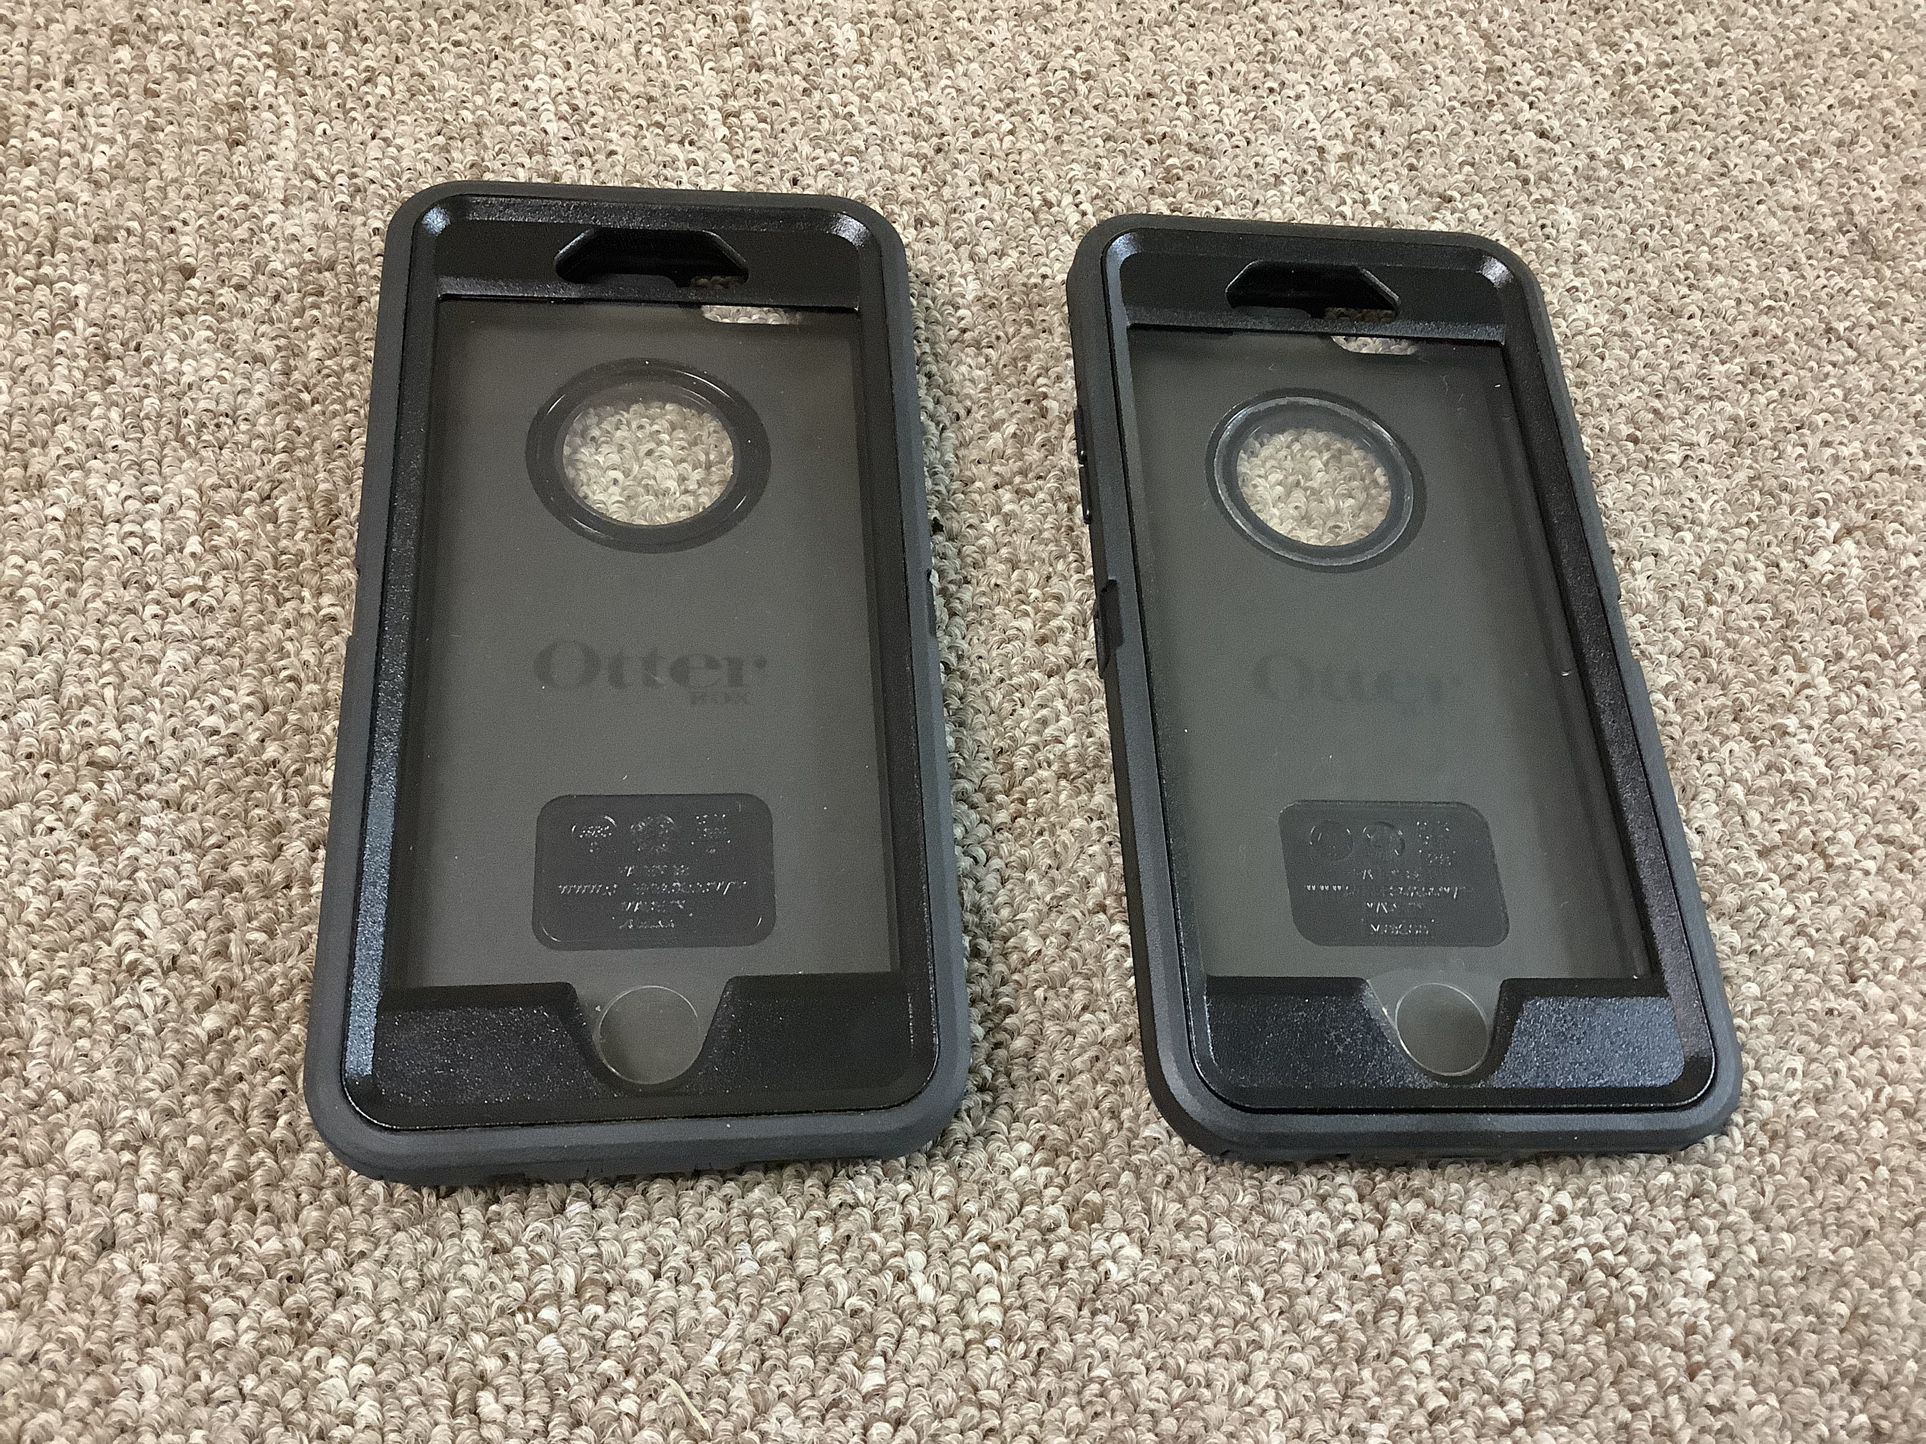 Otter Box - Set of 2 Cases For iPhone 6/6s